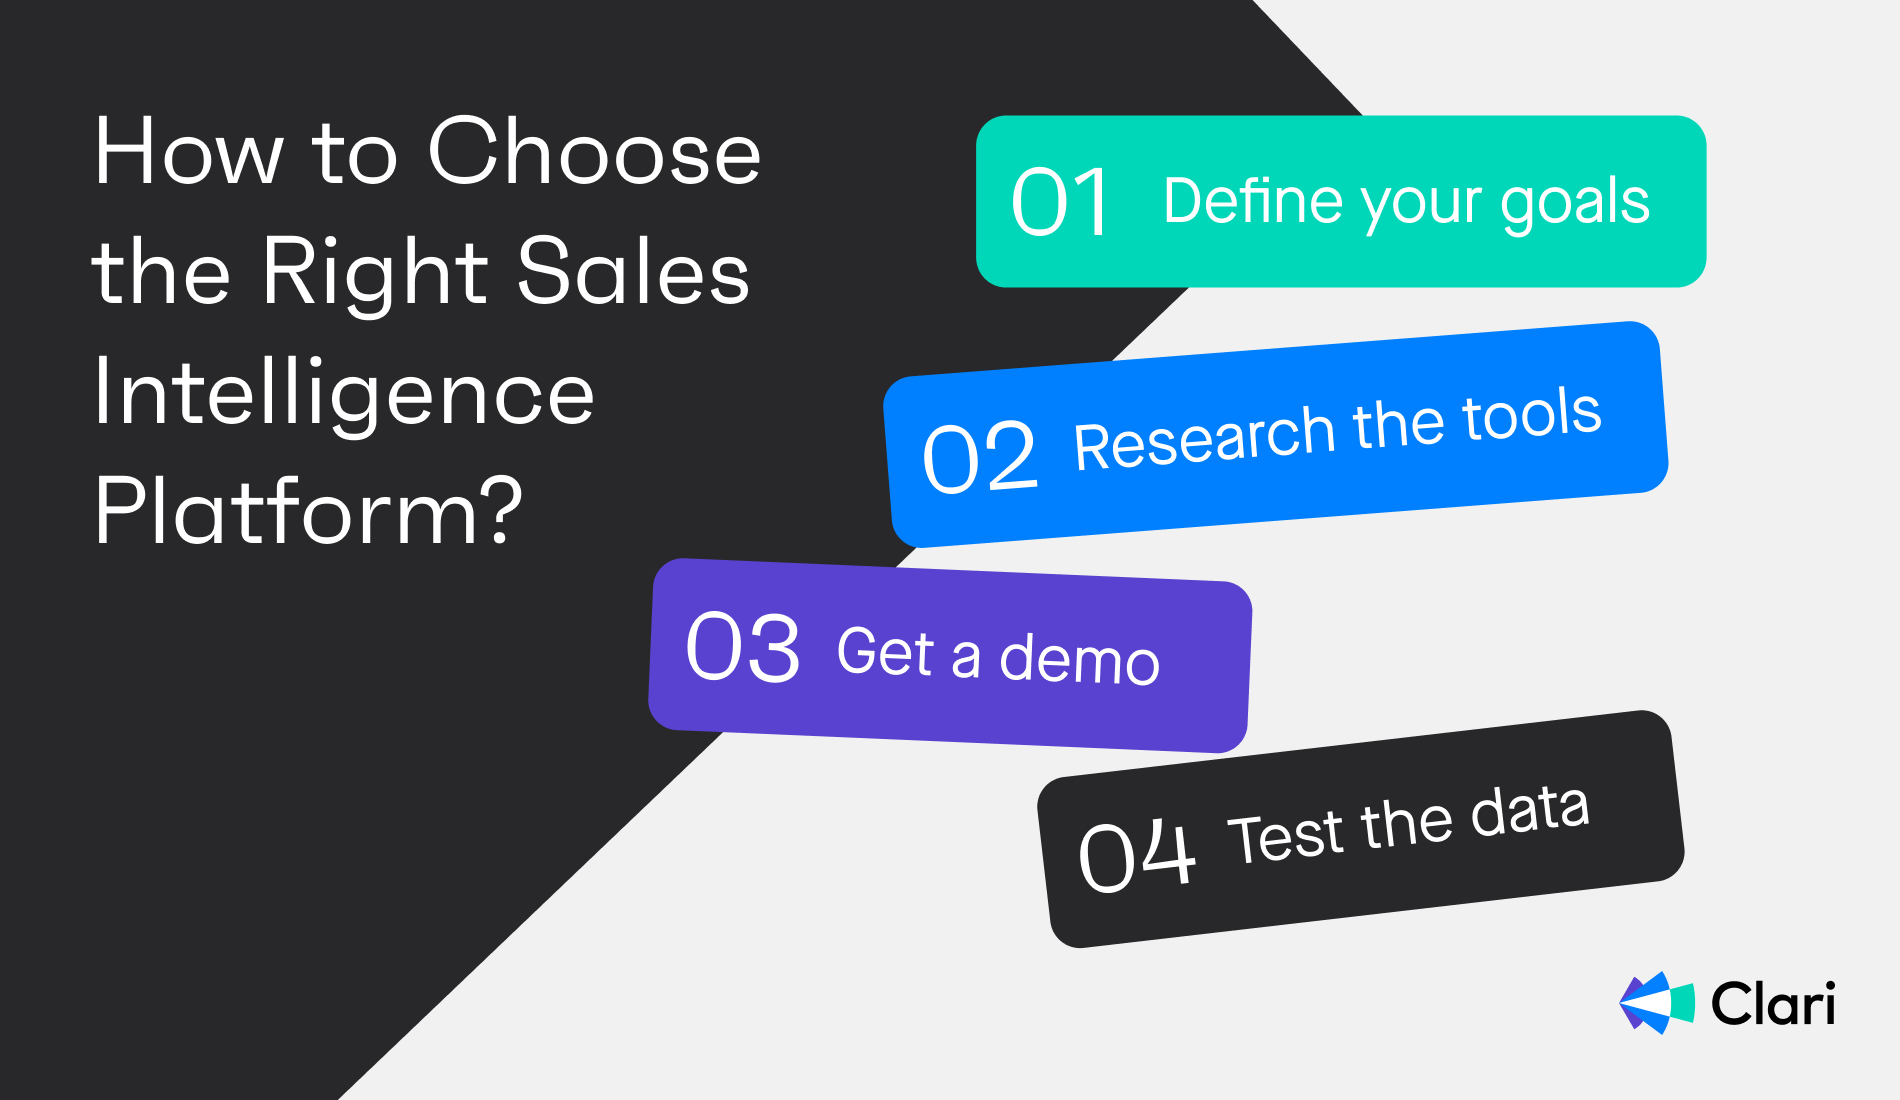 How to choose the right sales intelligence platform?